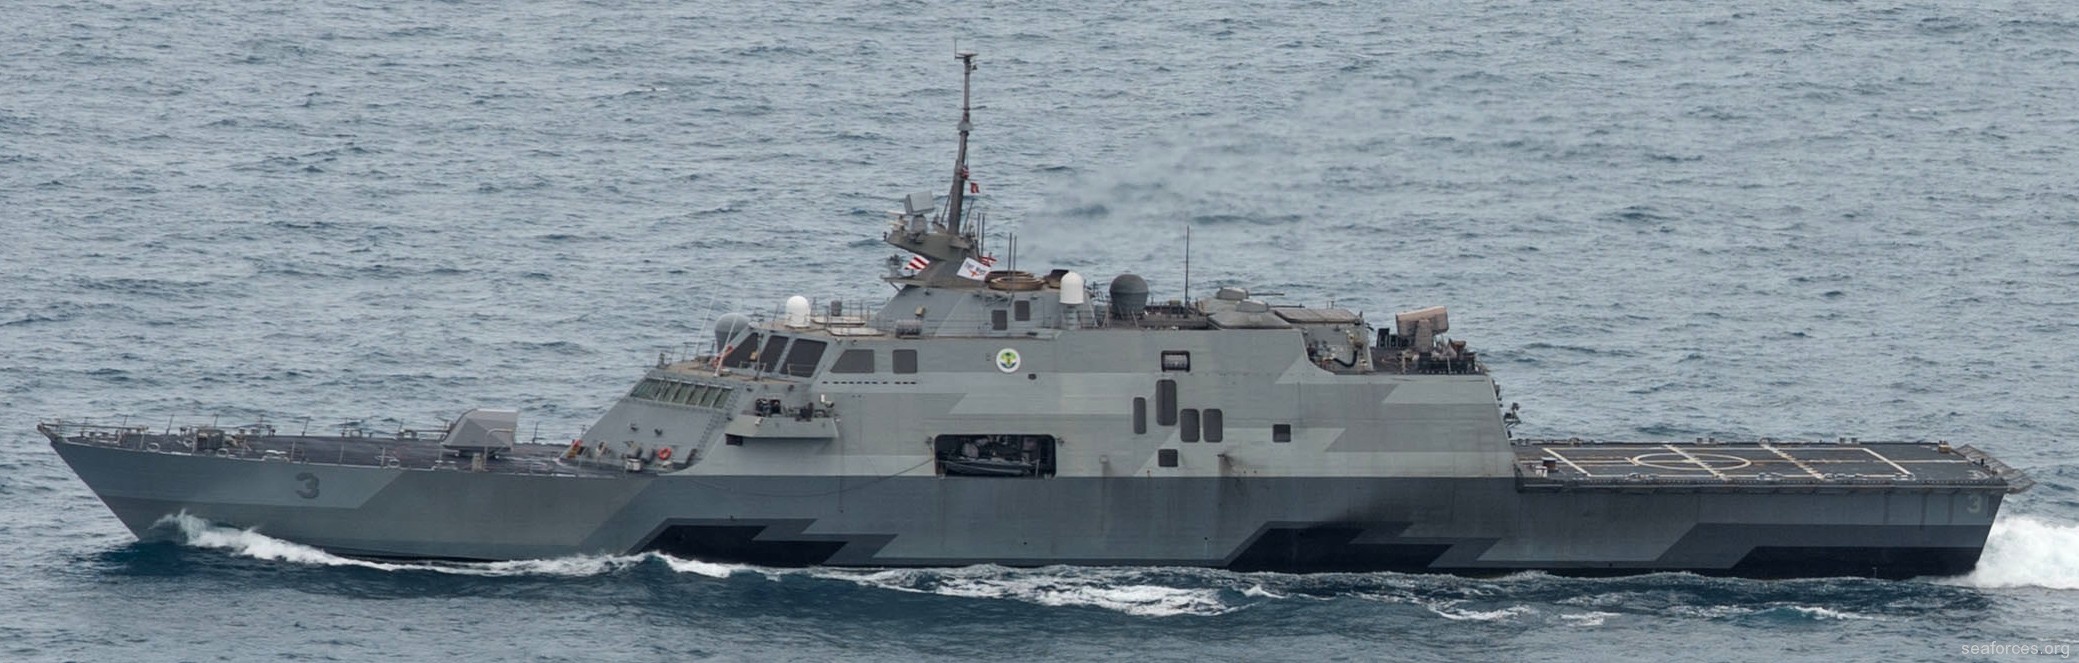 lcs-3 uss fort worth littoral combat ship freedom class us navy 23